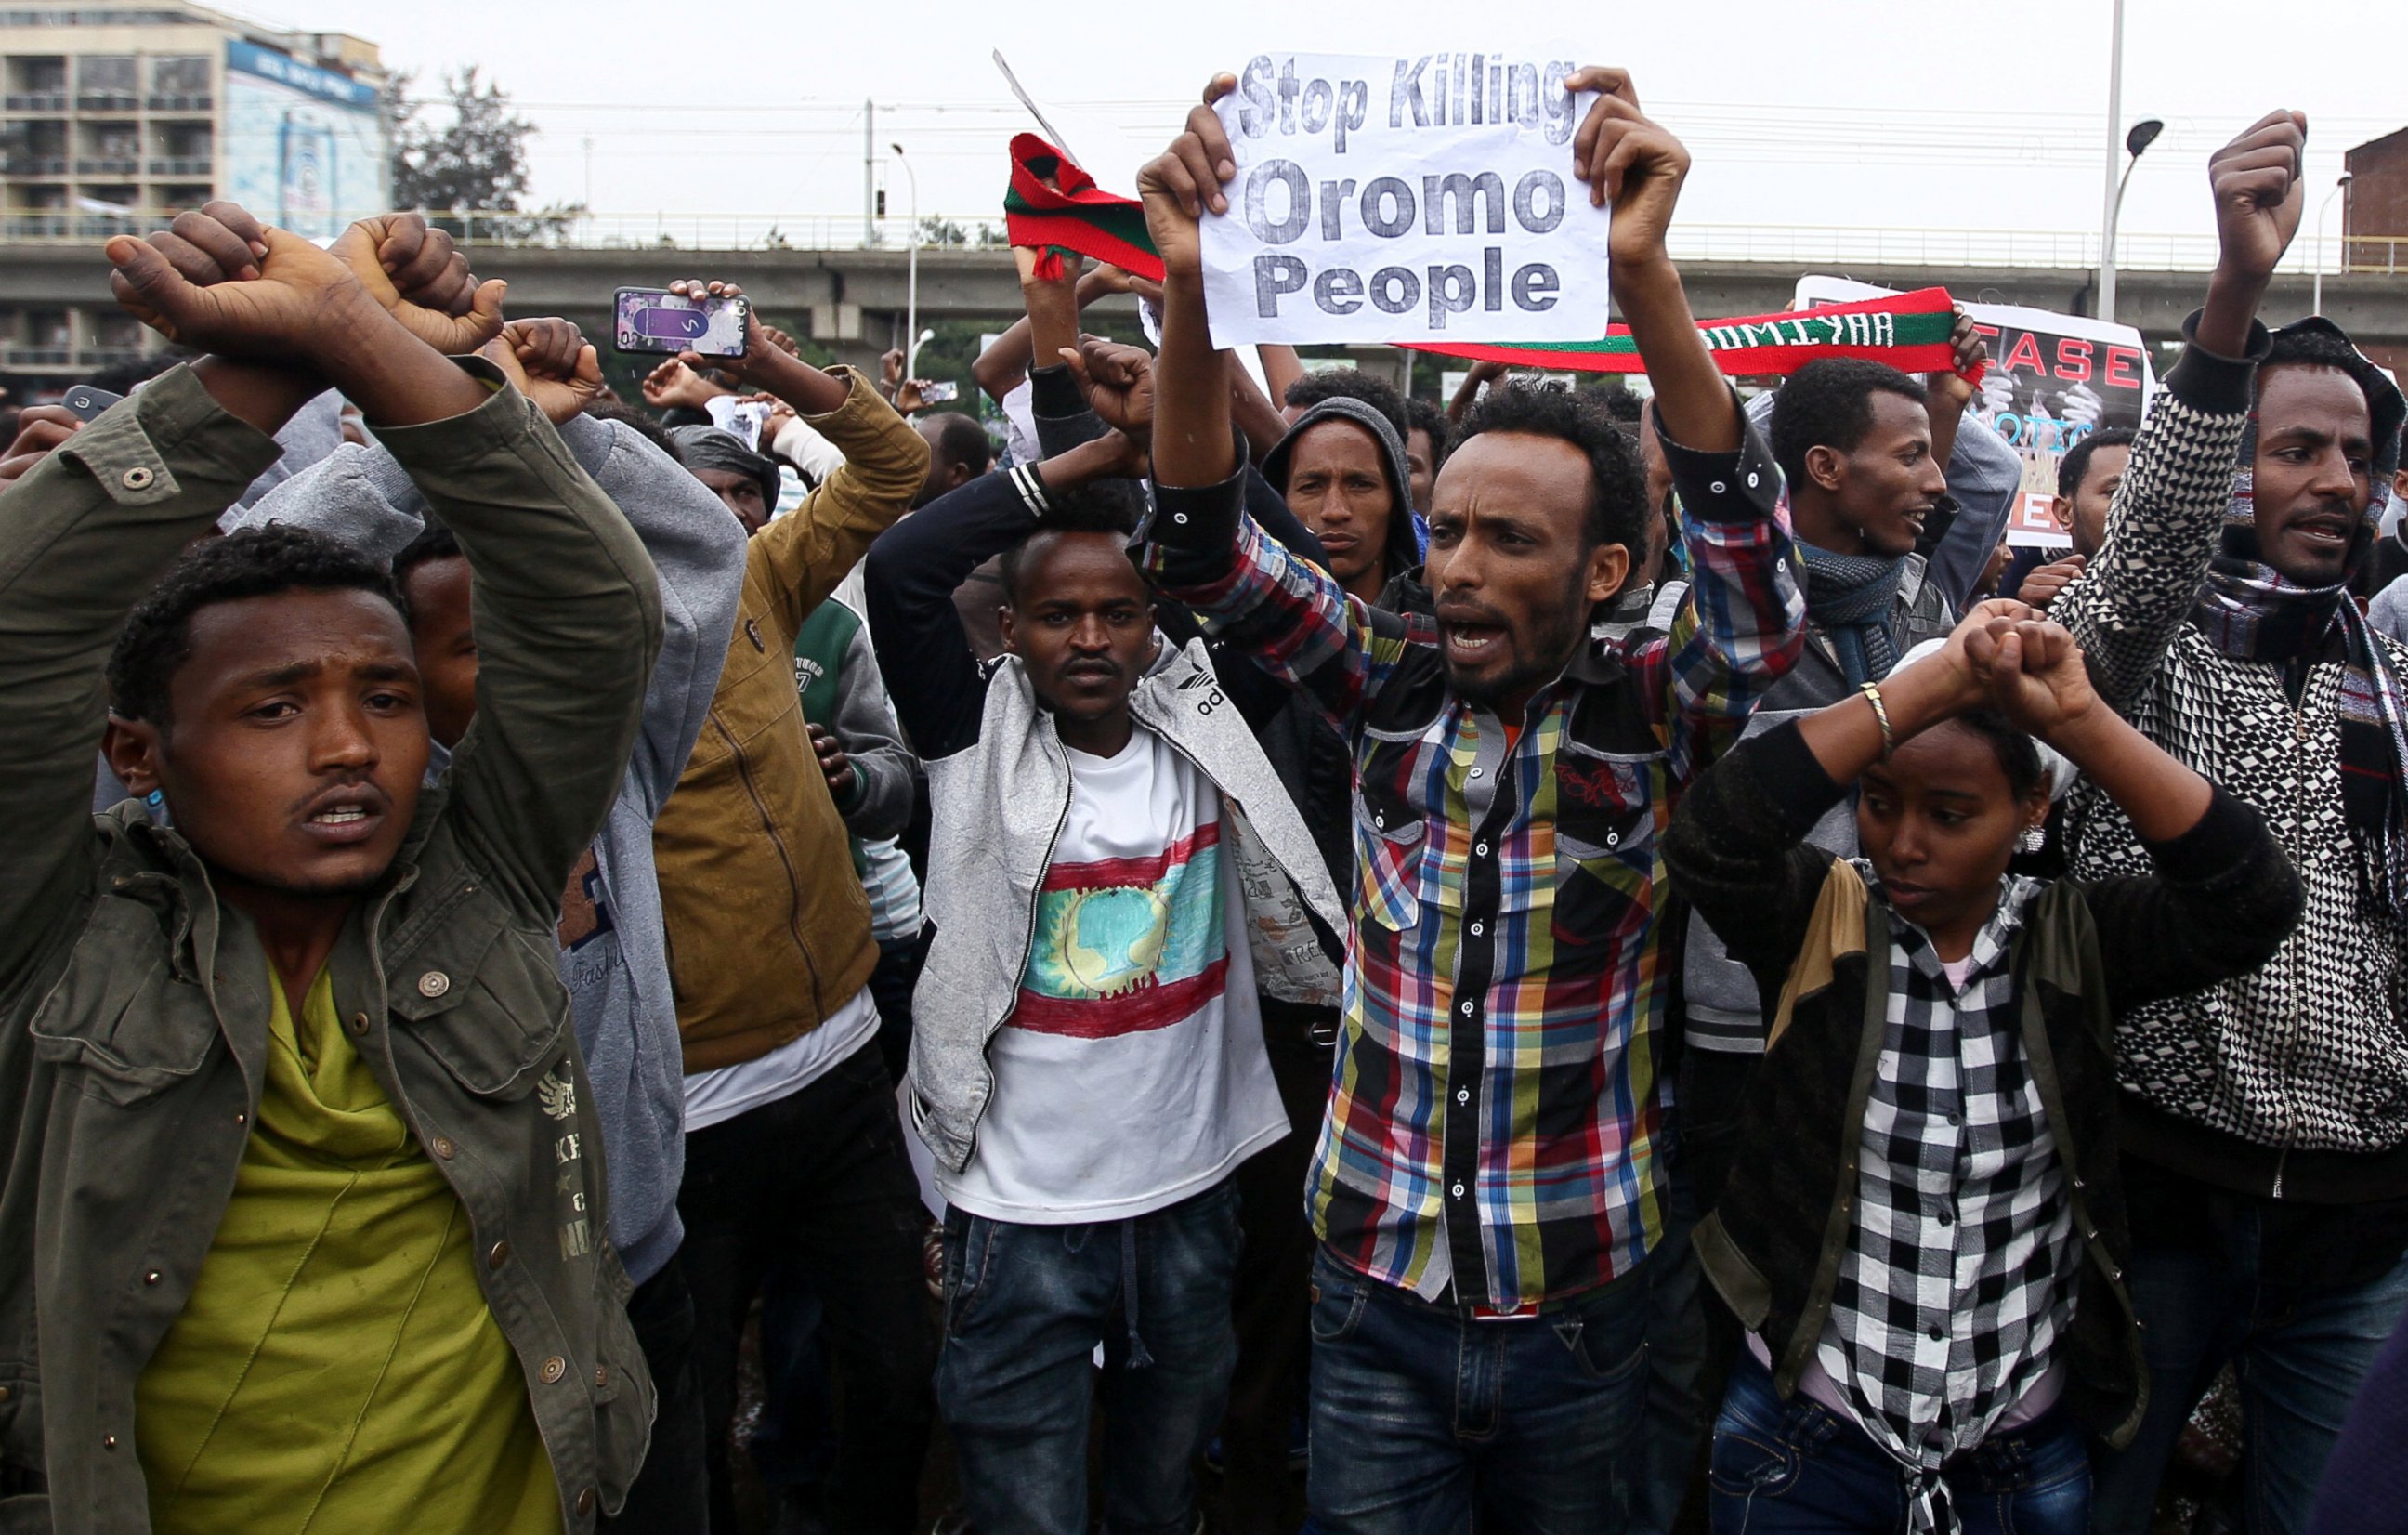 PHOTO: Protesters chant slogans during a demonstration over what they say is unfair distribution of wealth in the country at Meskel Square in Ethiopia's capital Addis Ababa, Aug. 6, 2016.